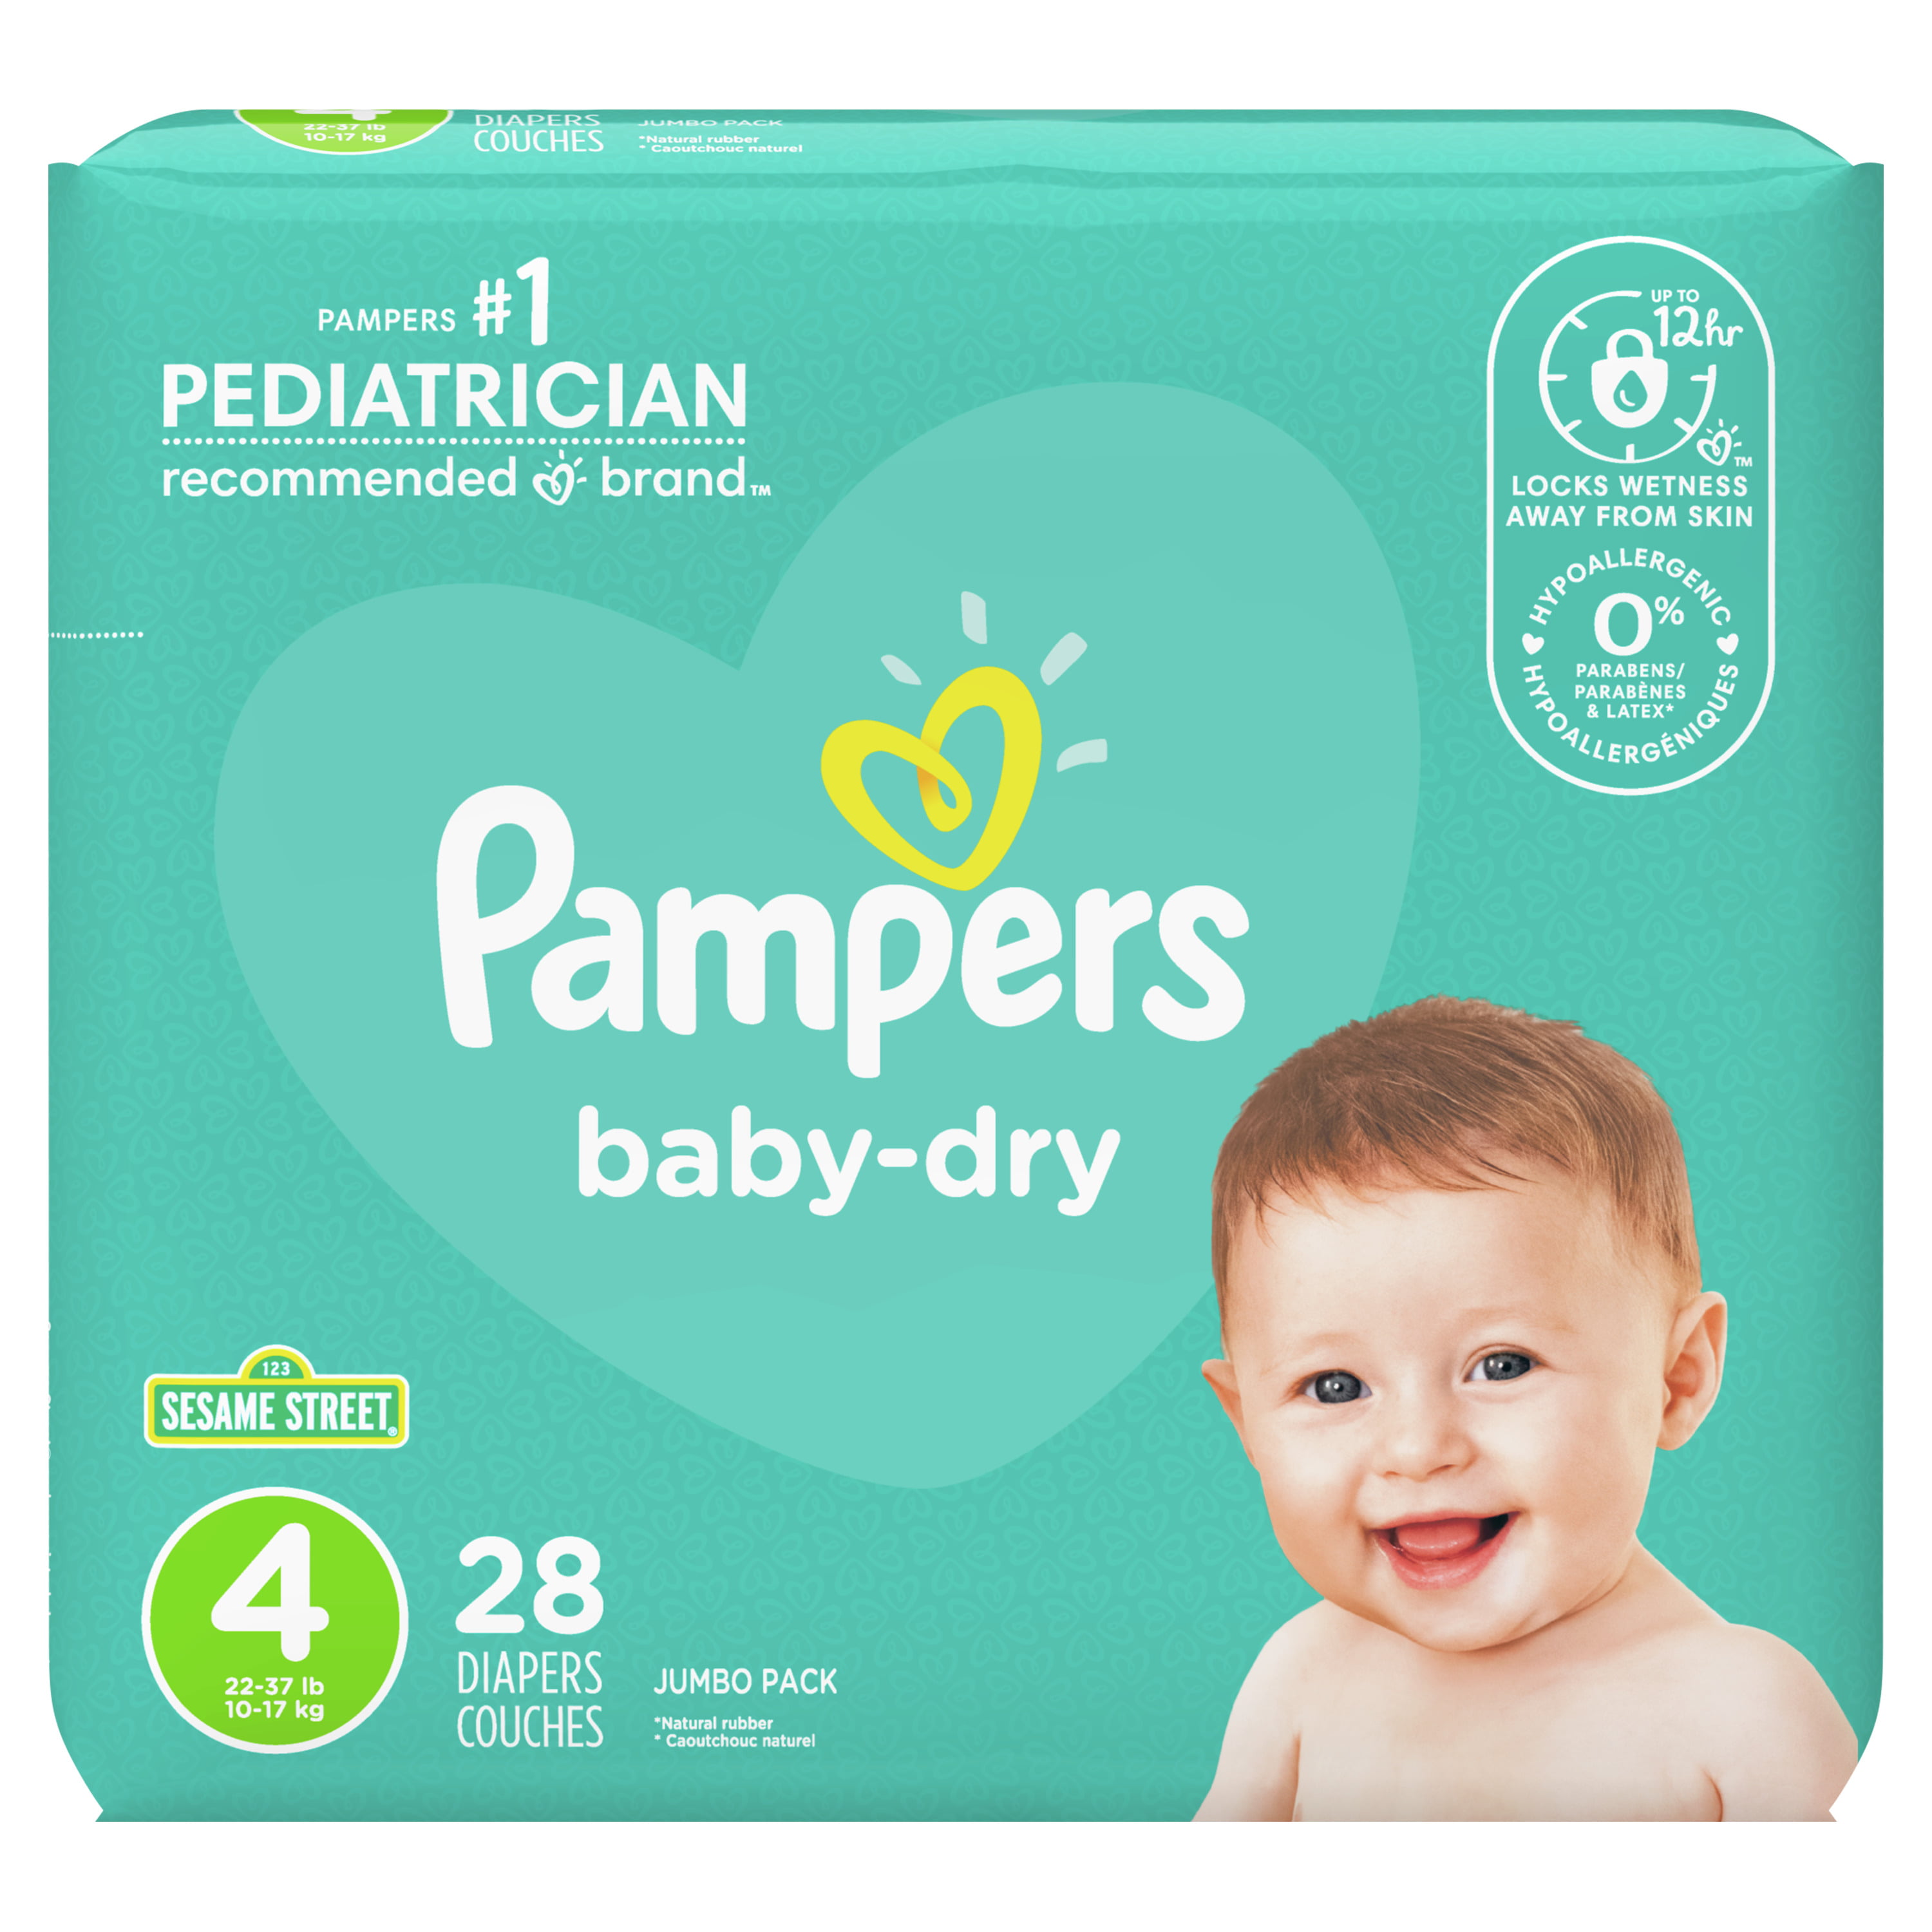 Pampers Baby-Dry Extra Protection Diapers, 28 - Walmart.com